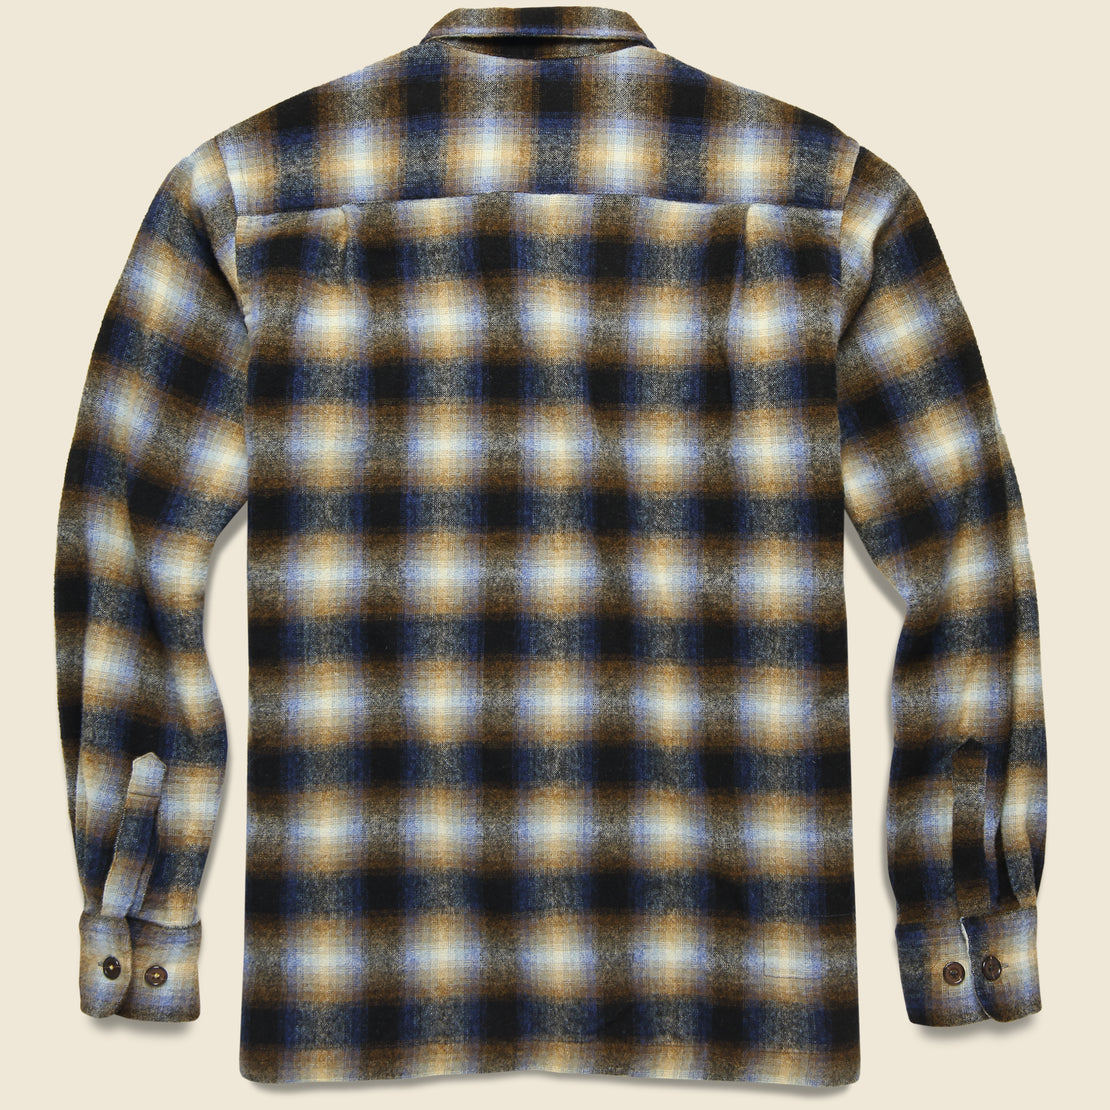 Utility Shirt - Navy Check - Universal Works - STAG Provisions - Tops - L/S Woven - Plaid